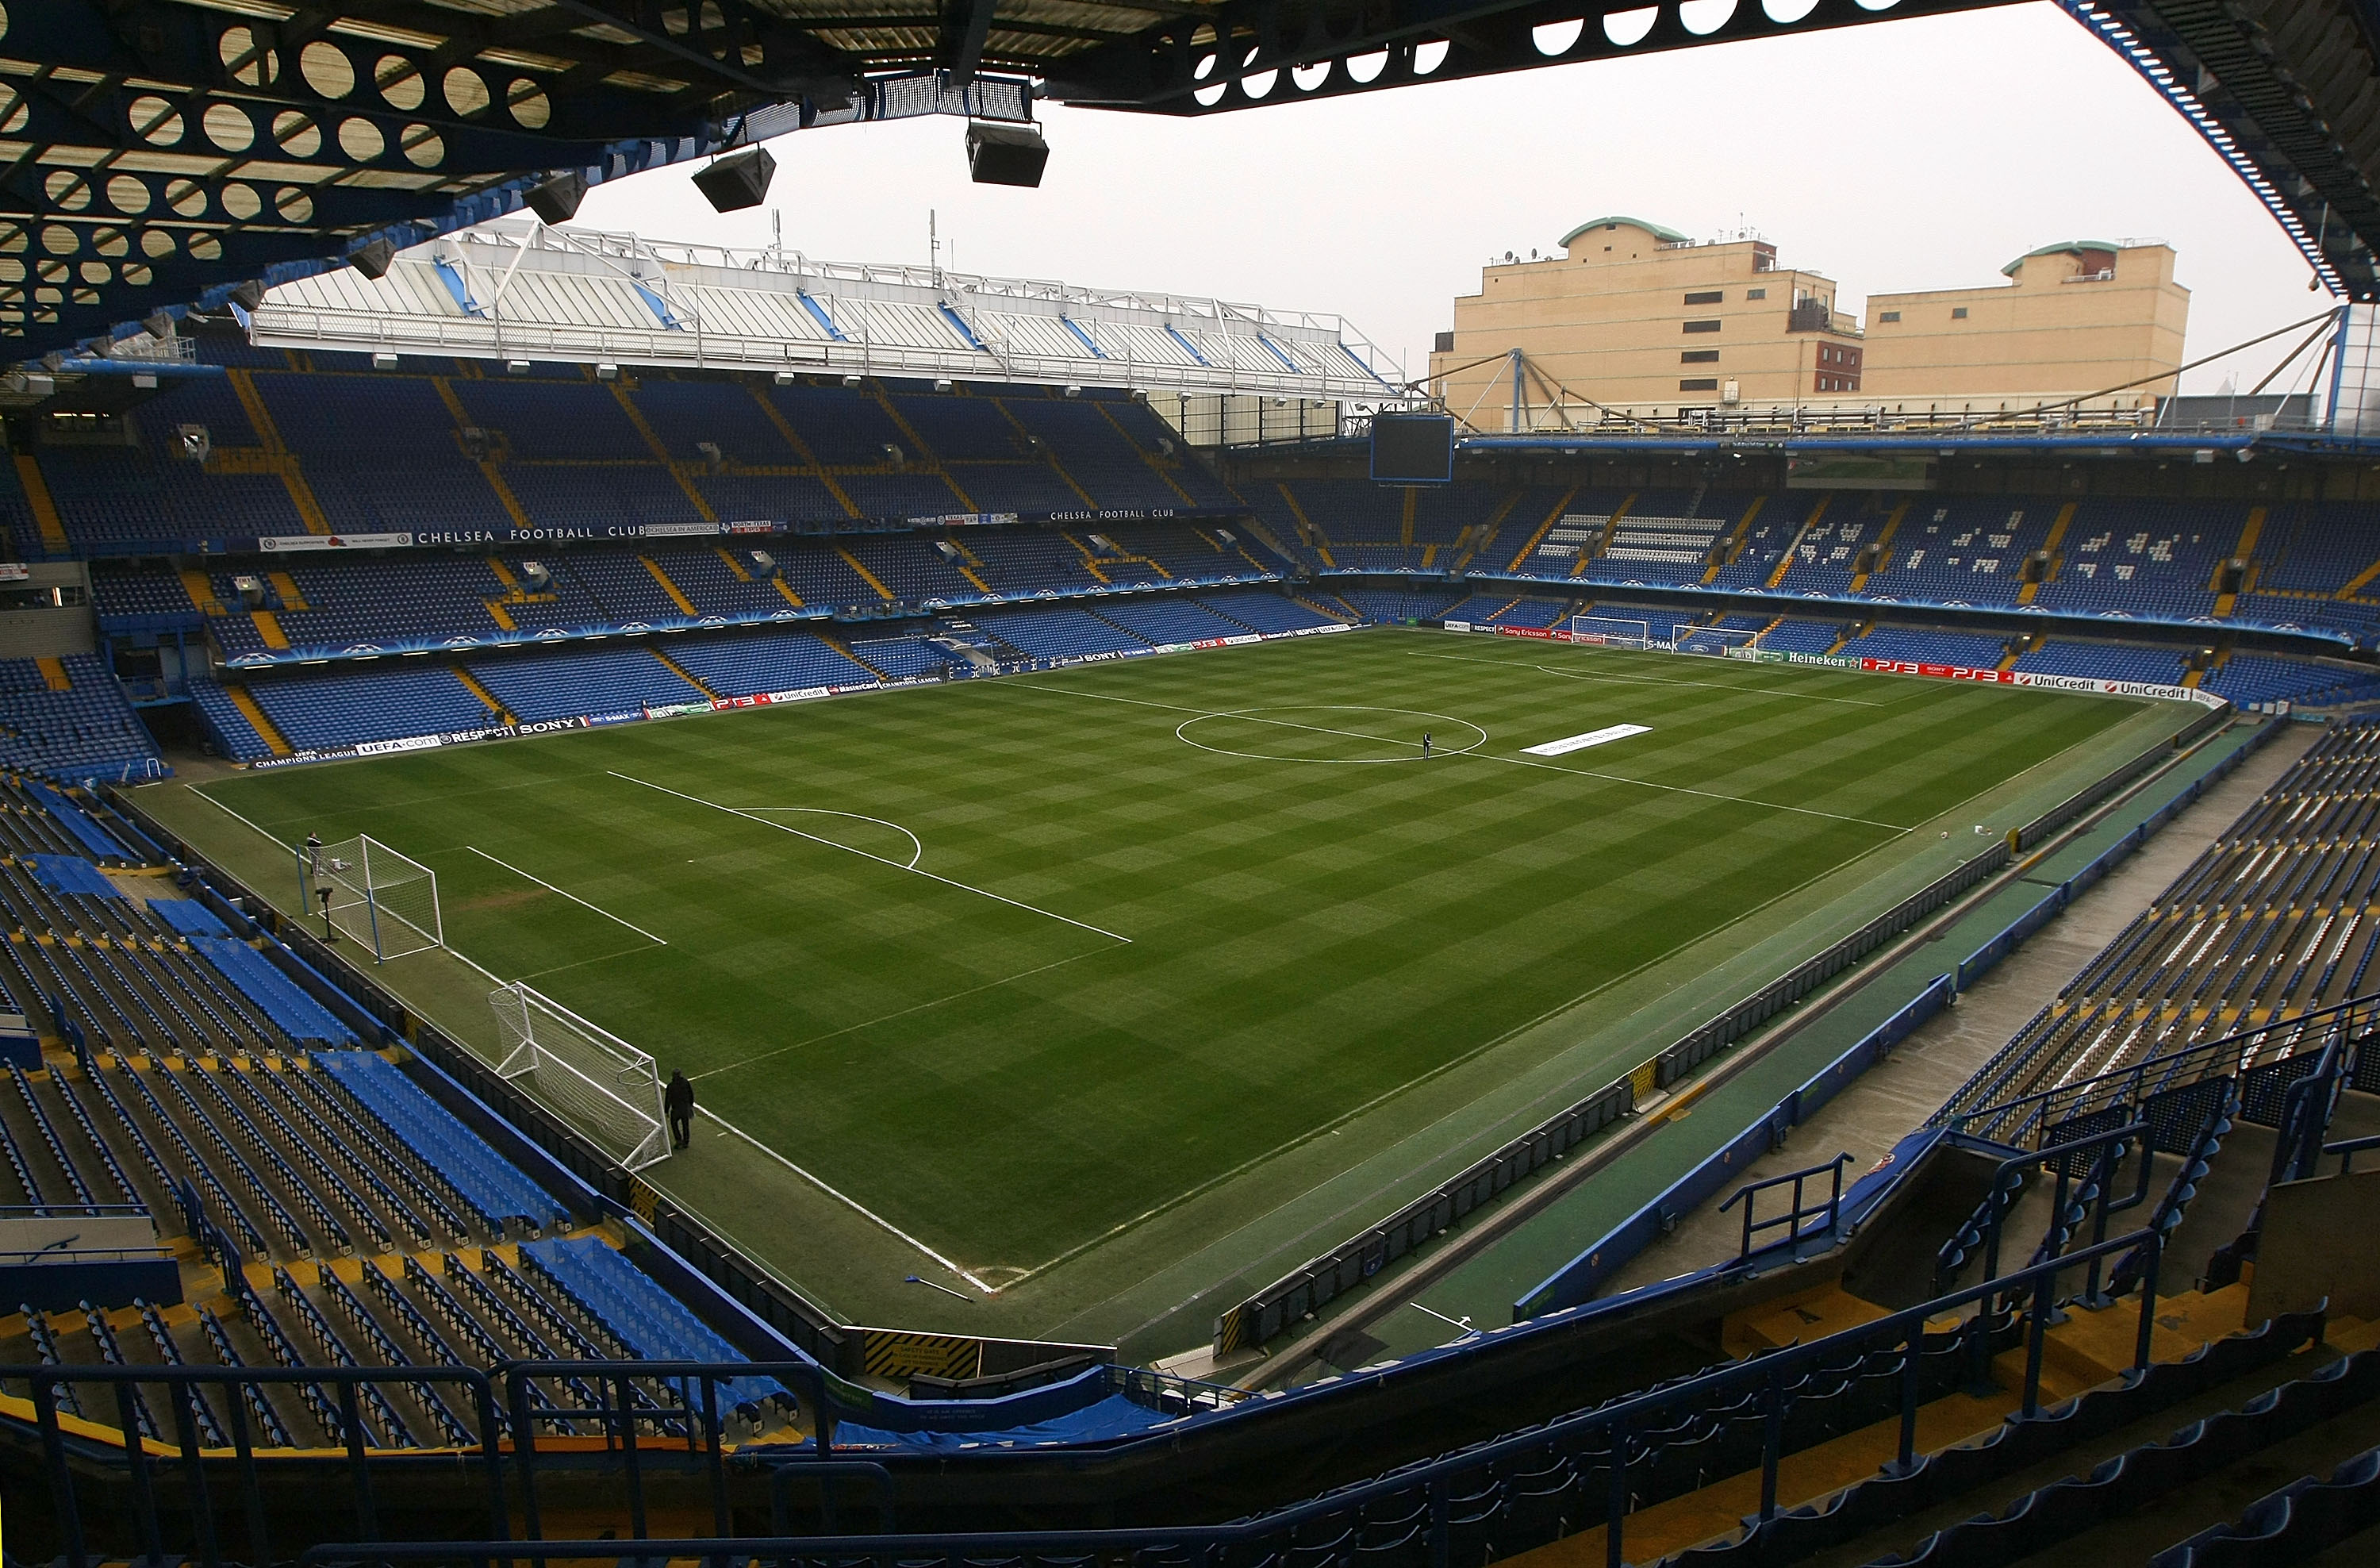 LONDON, ENGLAND - MARCH 16: A general view of Stamford Bridge home of Chelsea Football Club on March 16, 2011 in London, England. (Photo by Tom Dulat/Getty Images)